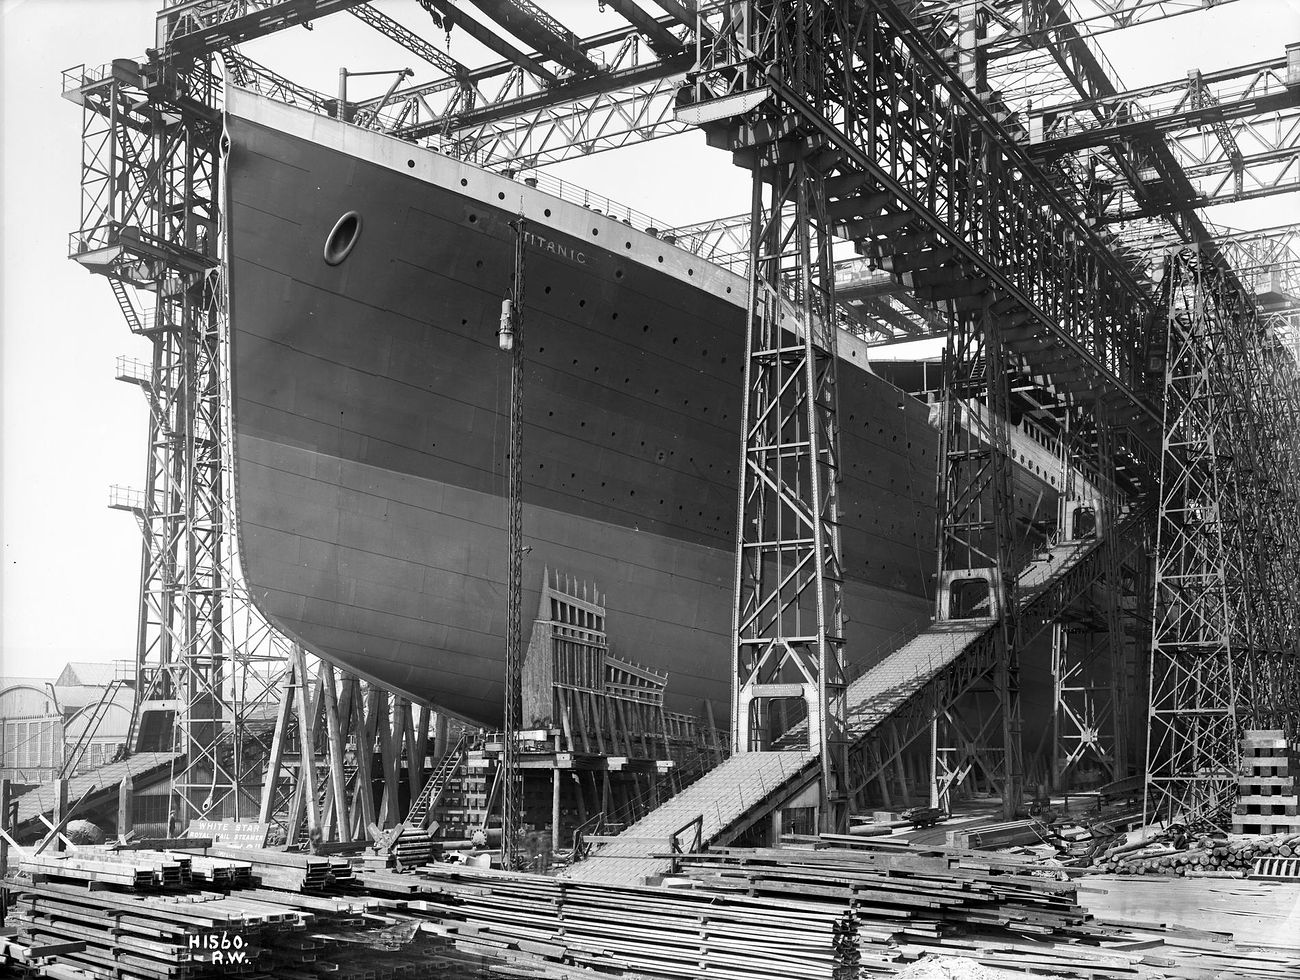 The Titanic ready for launch